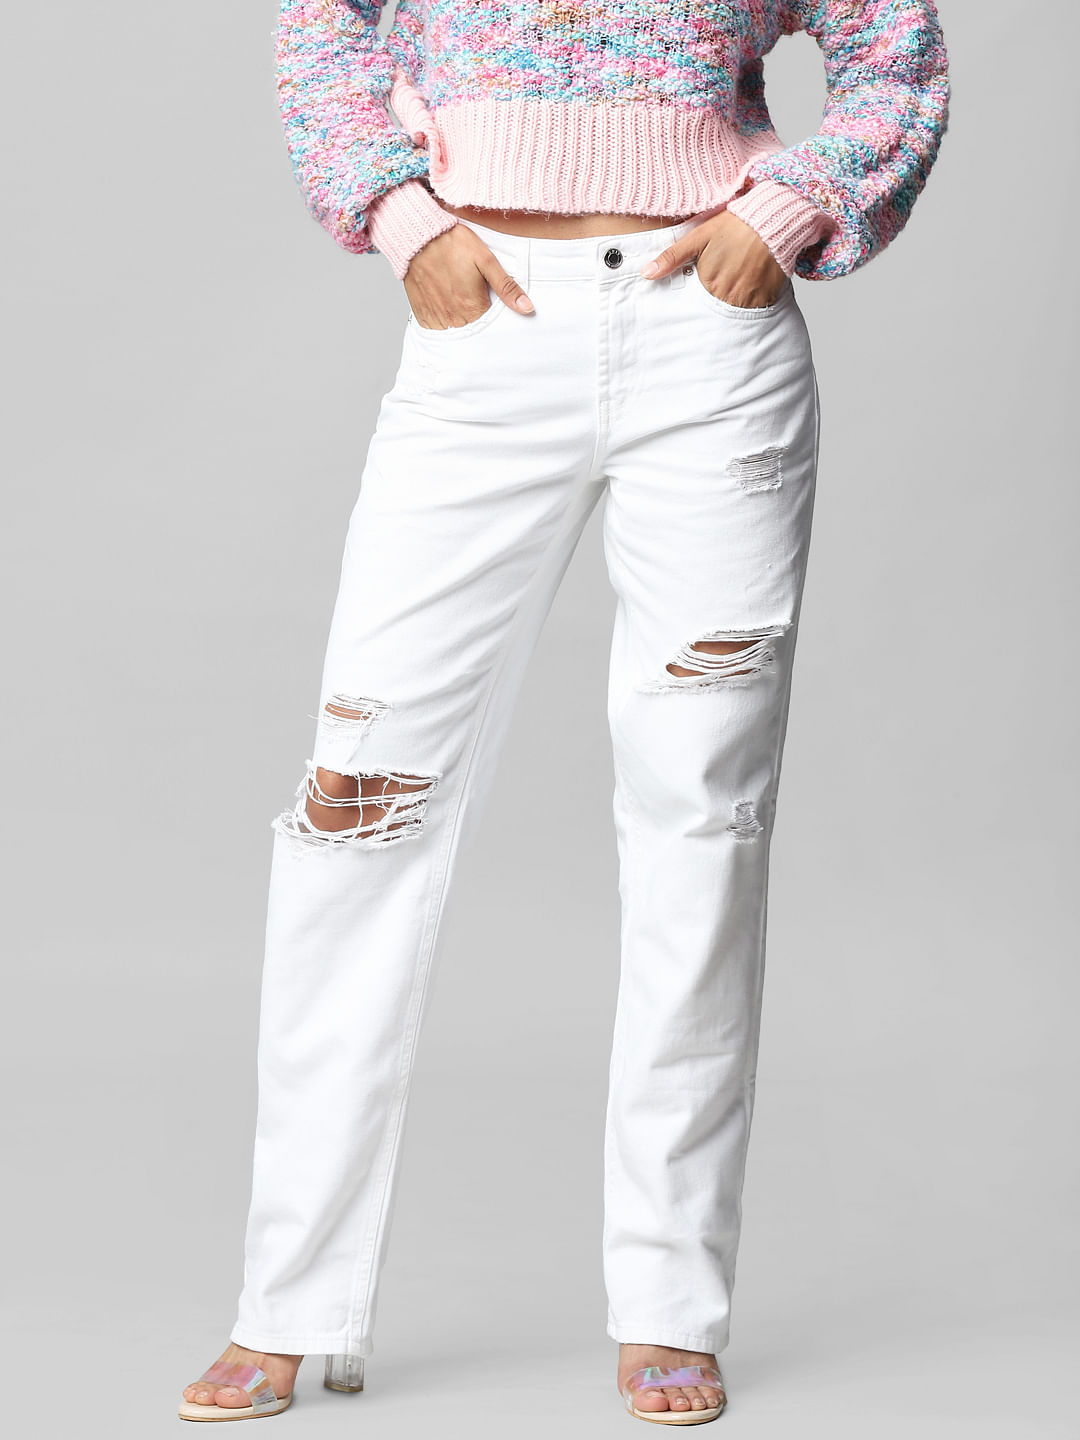 Buy Womens Casual Ripped Holes Skinny Jeans Jeggings Straight Fit Denim  Pants US 4 White 15 at Amazonin